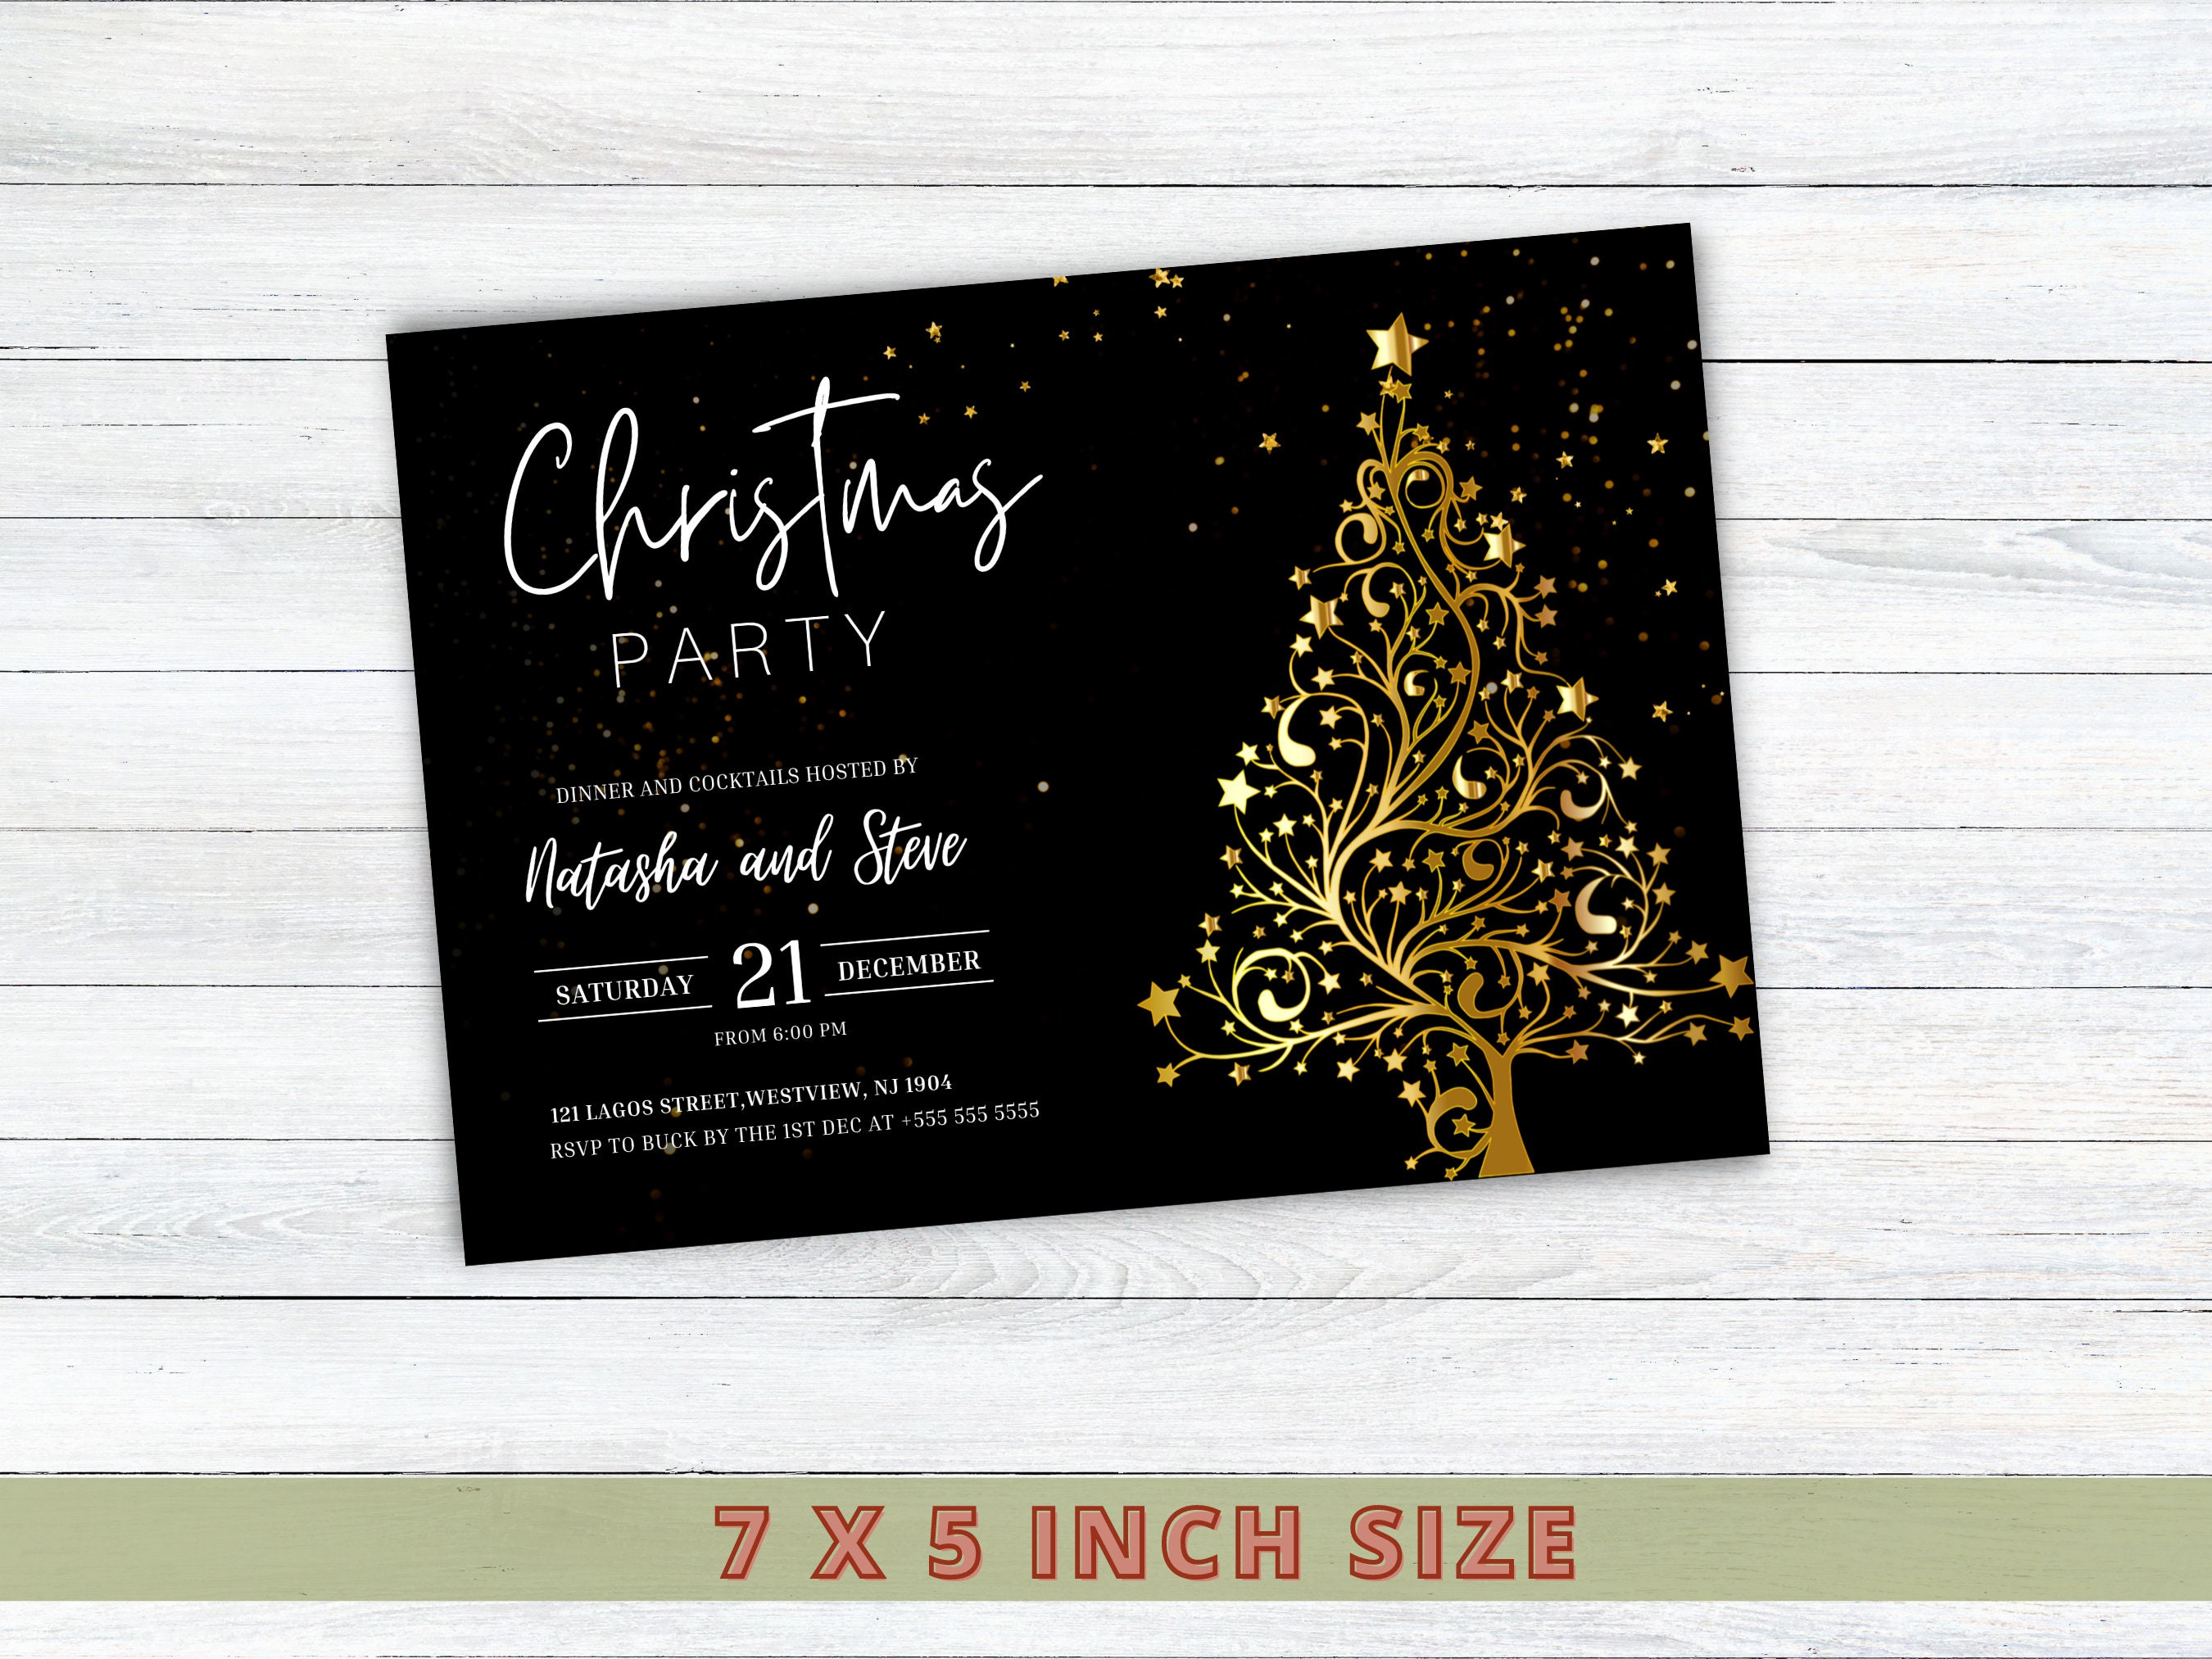 Corporate Christmas Party Invitations, Digital Christmas Party Invite ...